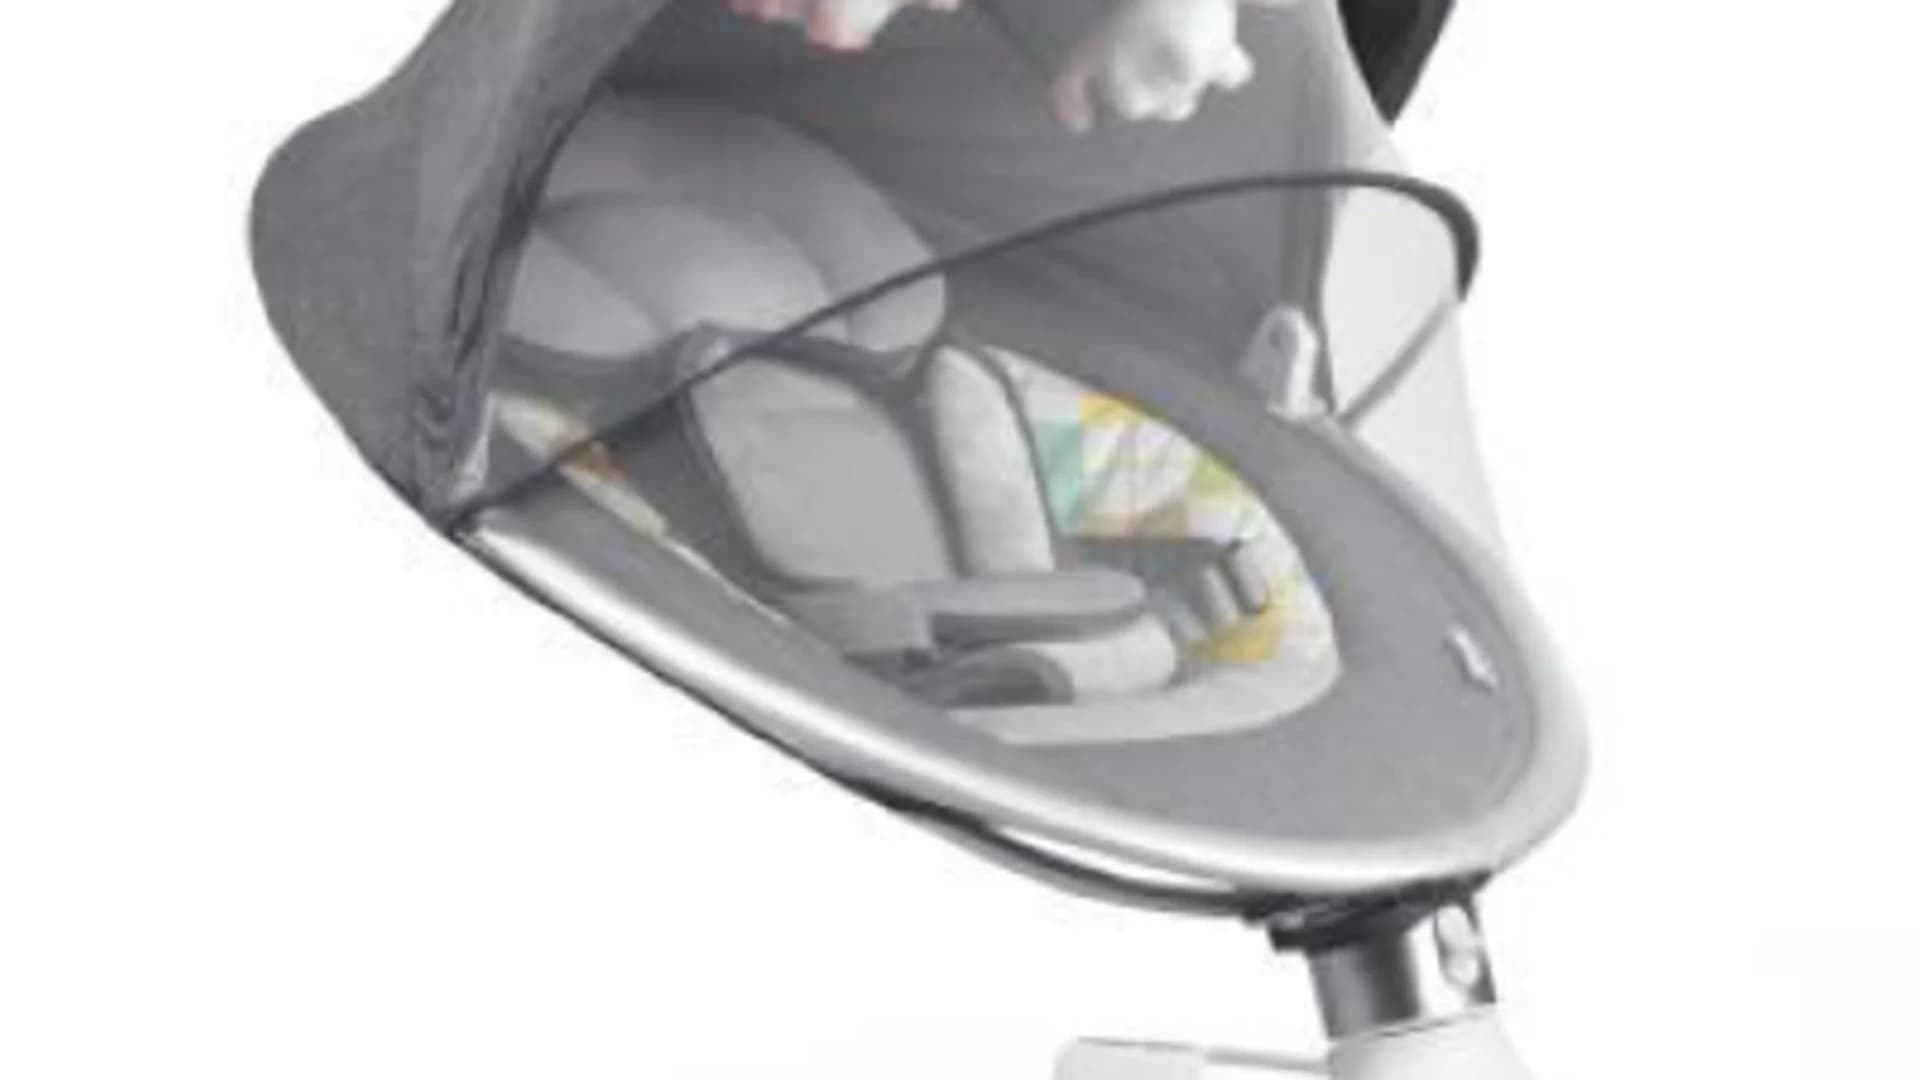 Baby swings sold exclusively on Amazon recalled due to suffocation hazard